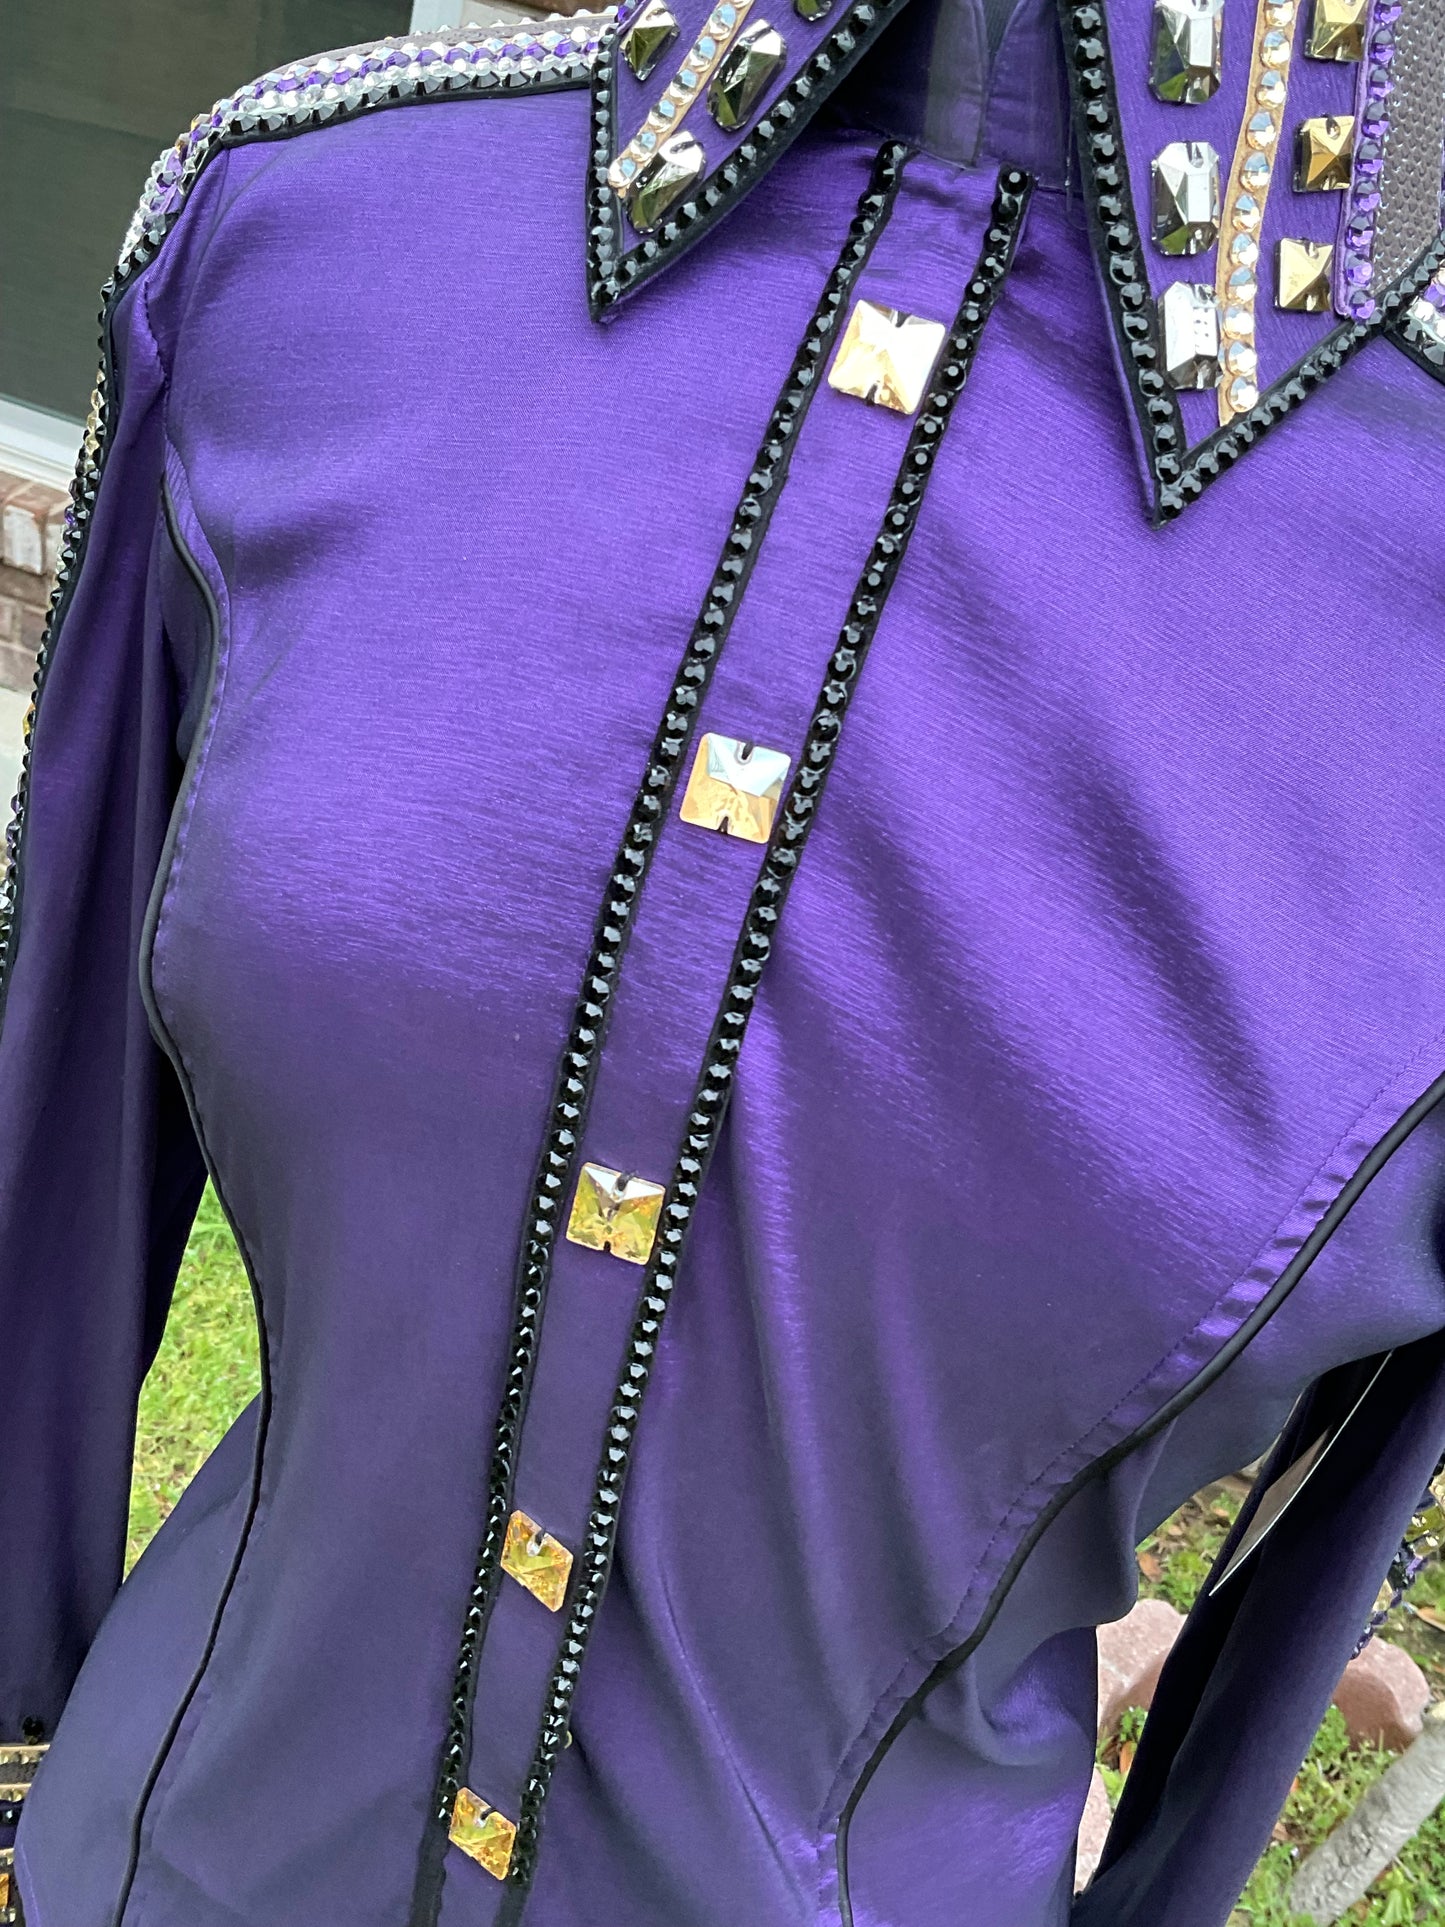 Size Large Dark Purple stretch taffeta with Black, Silver, and Gold